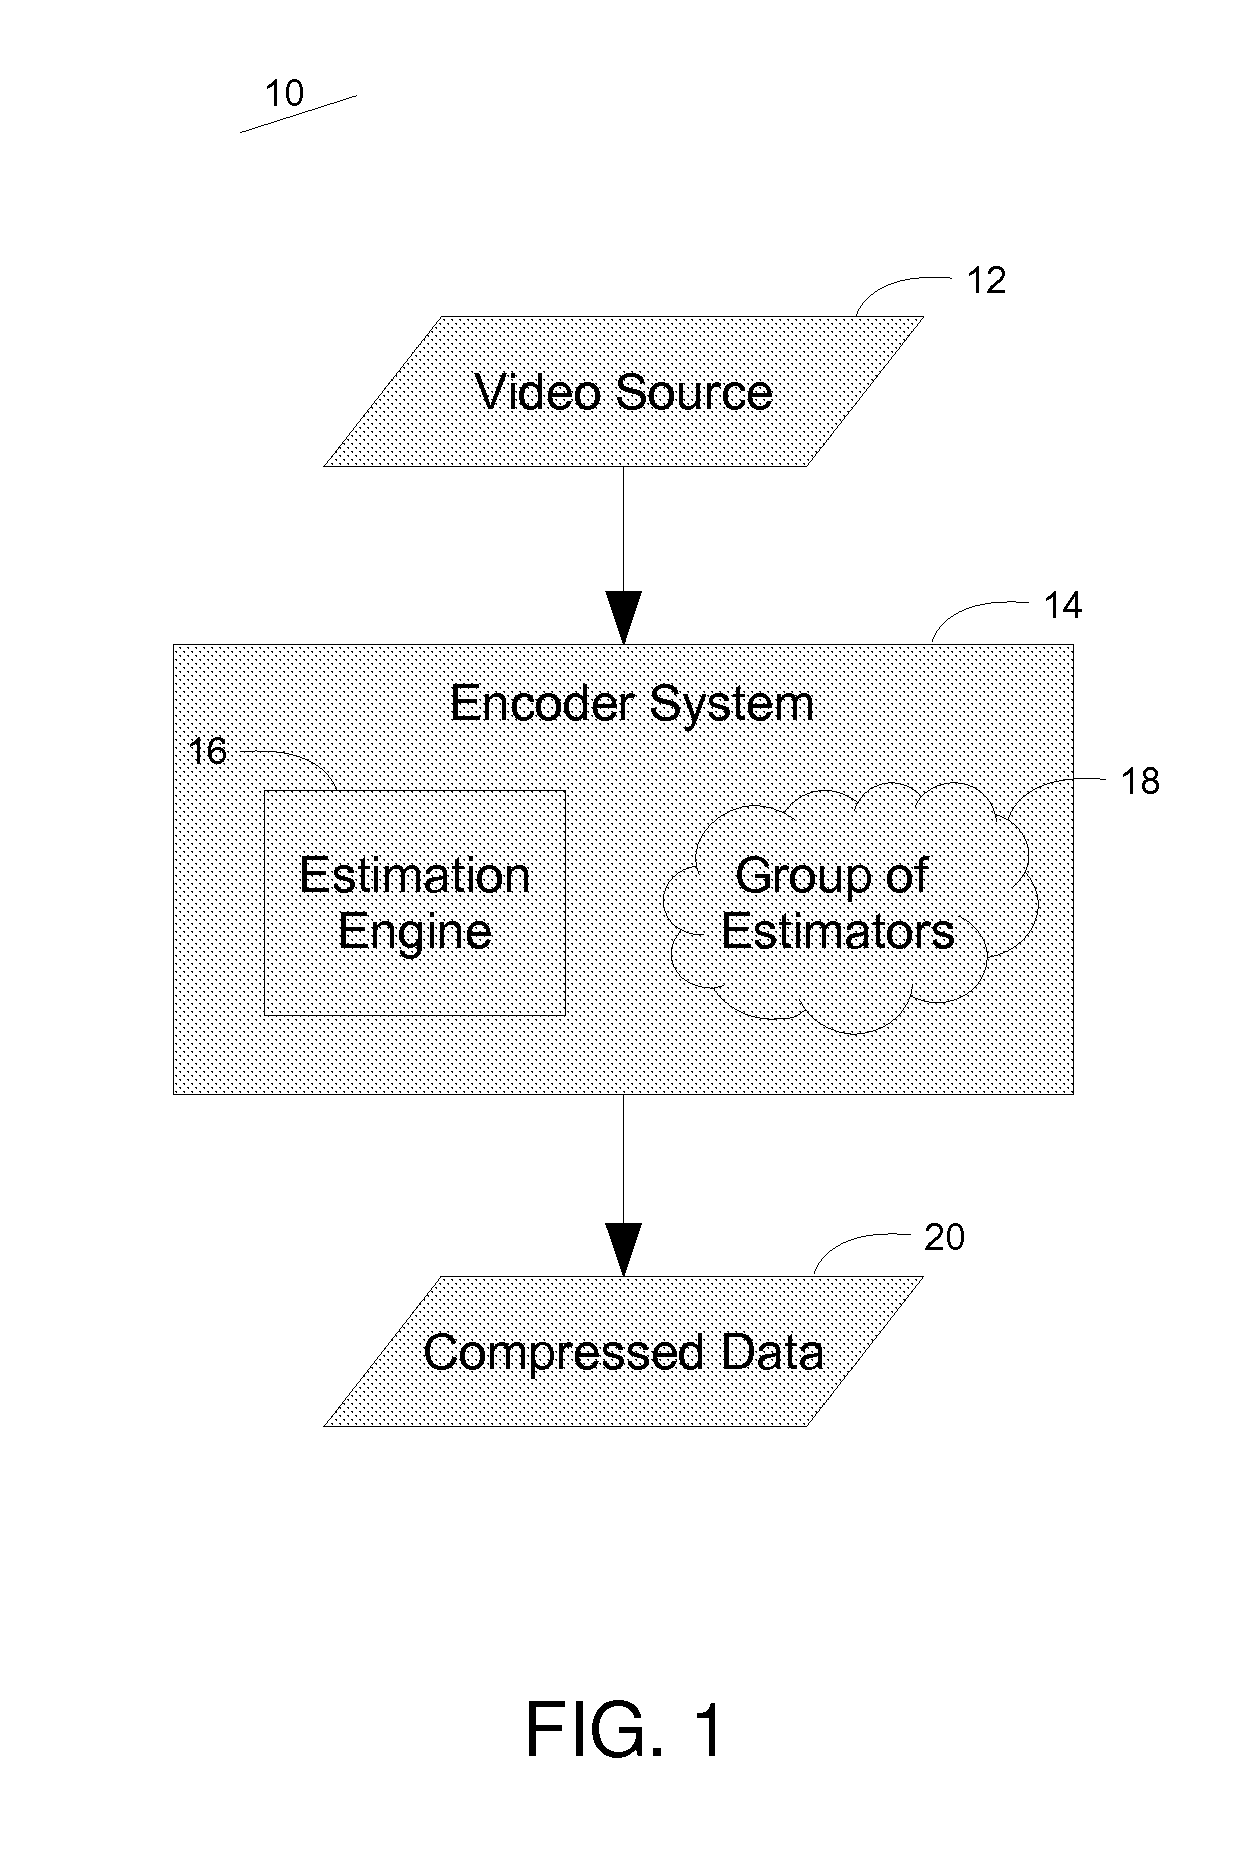 Method and system for parallelizing video compression